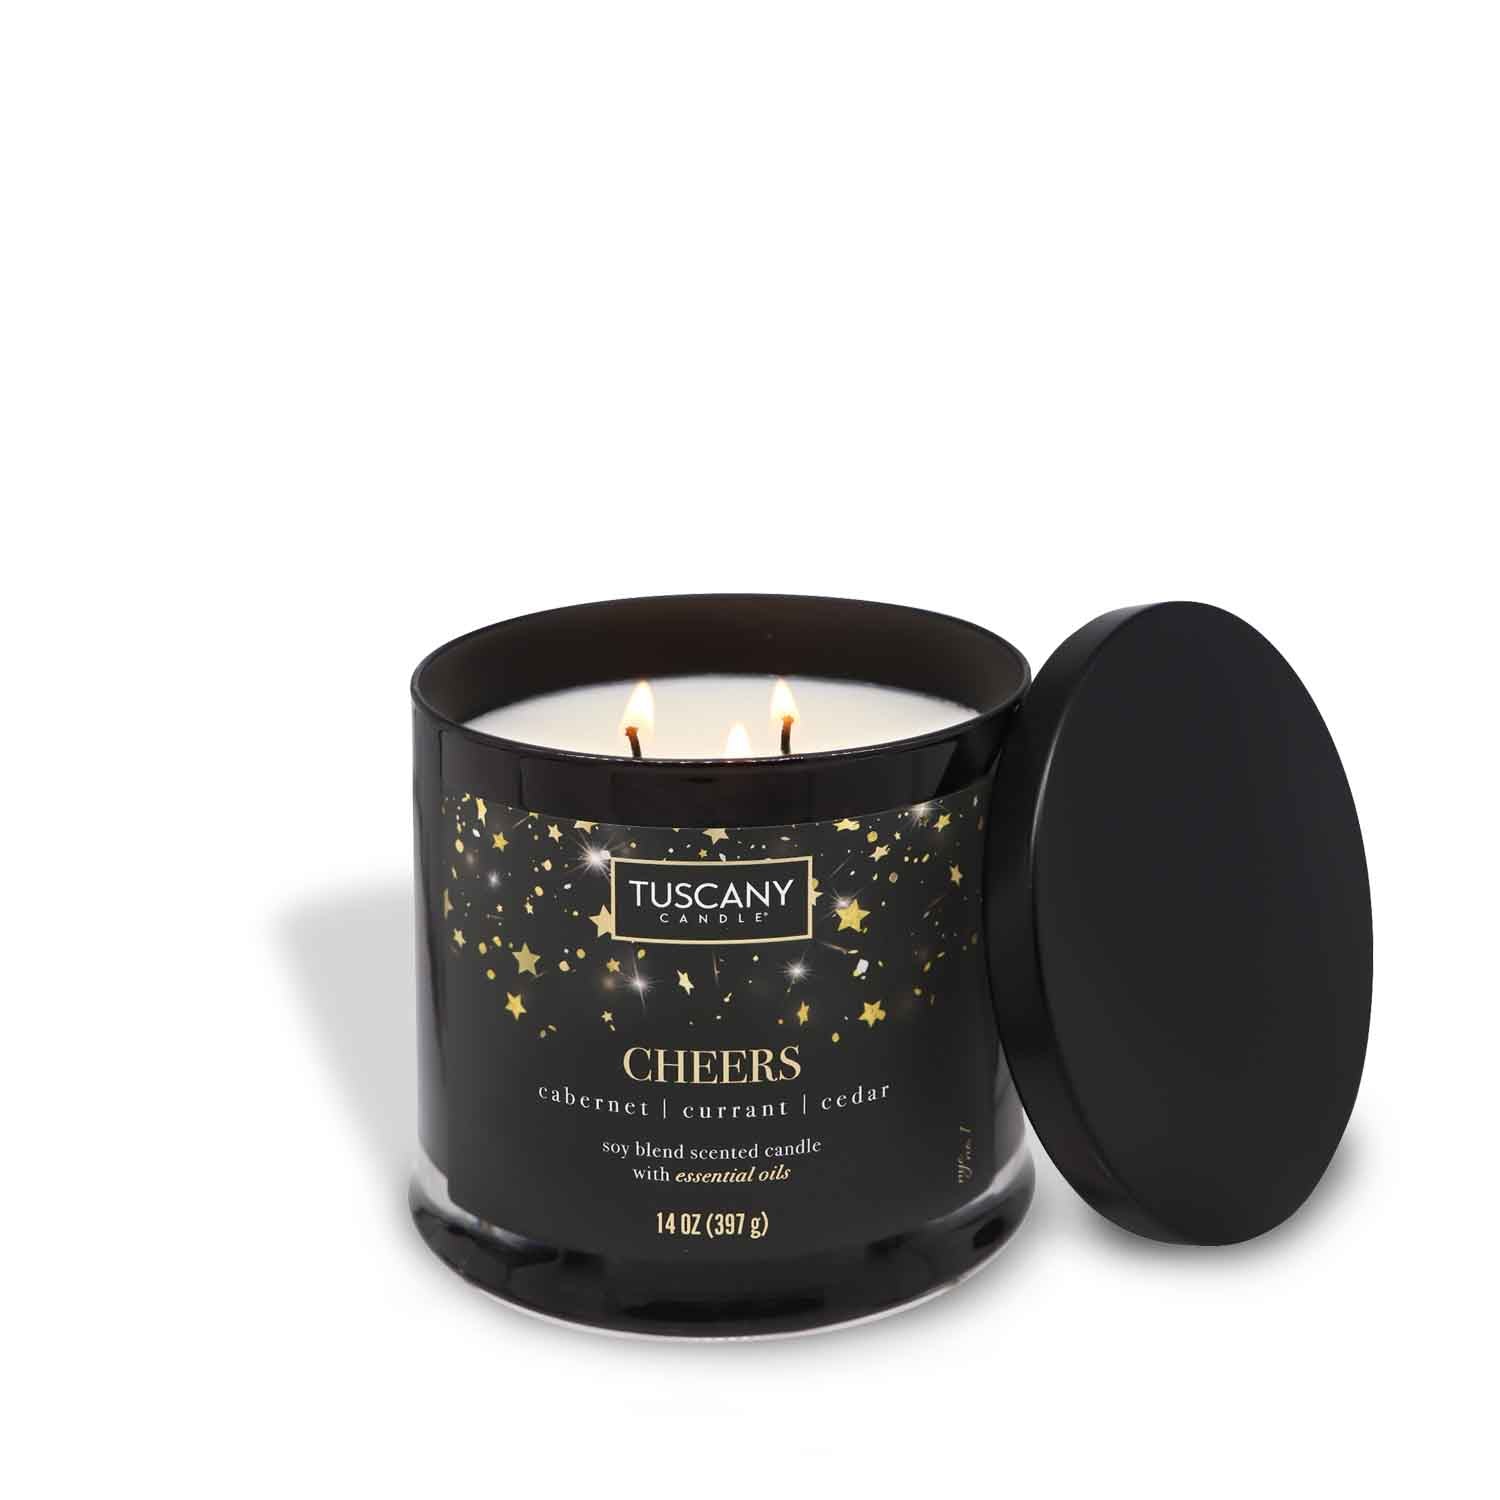 A Cheers scented candle adorned with stars and a black lid, perfect for holiday celebrations.